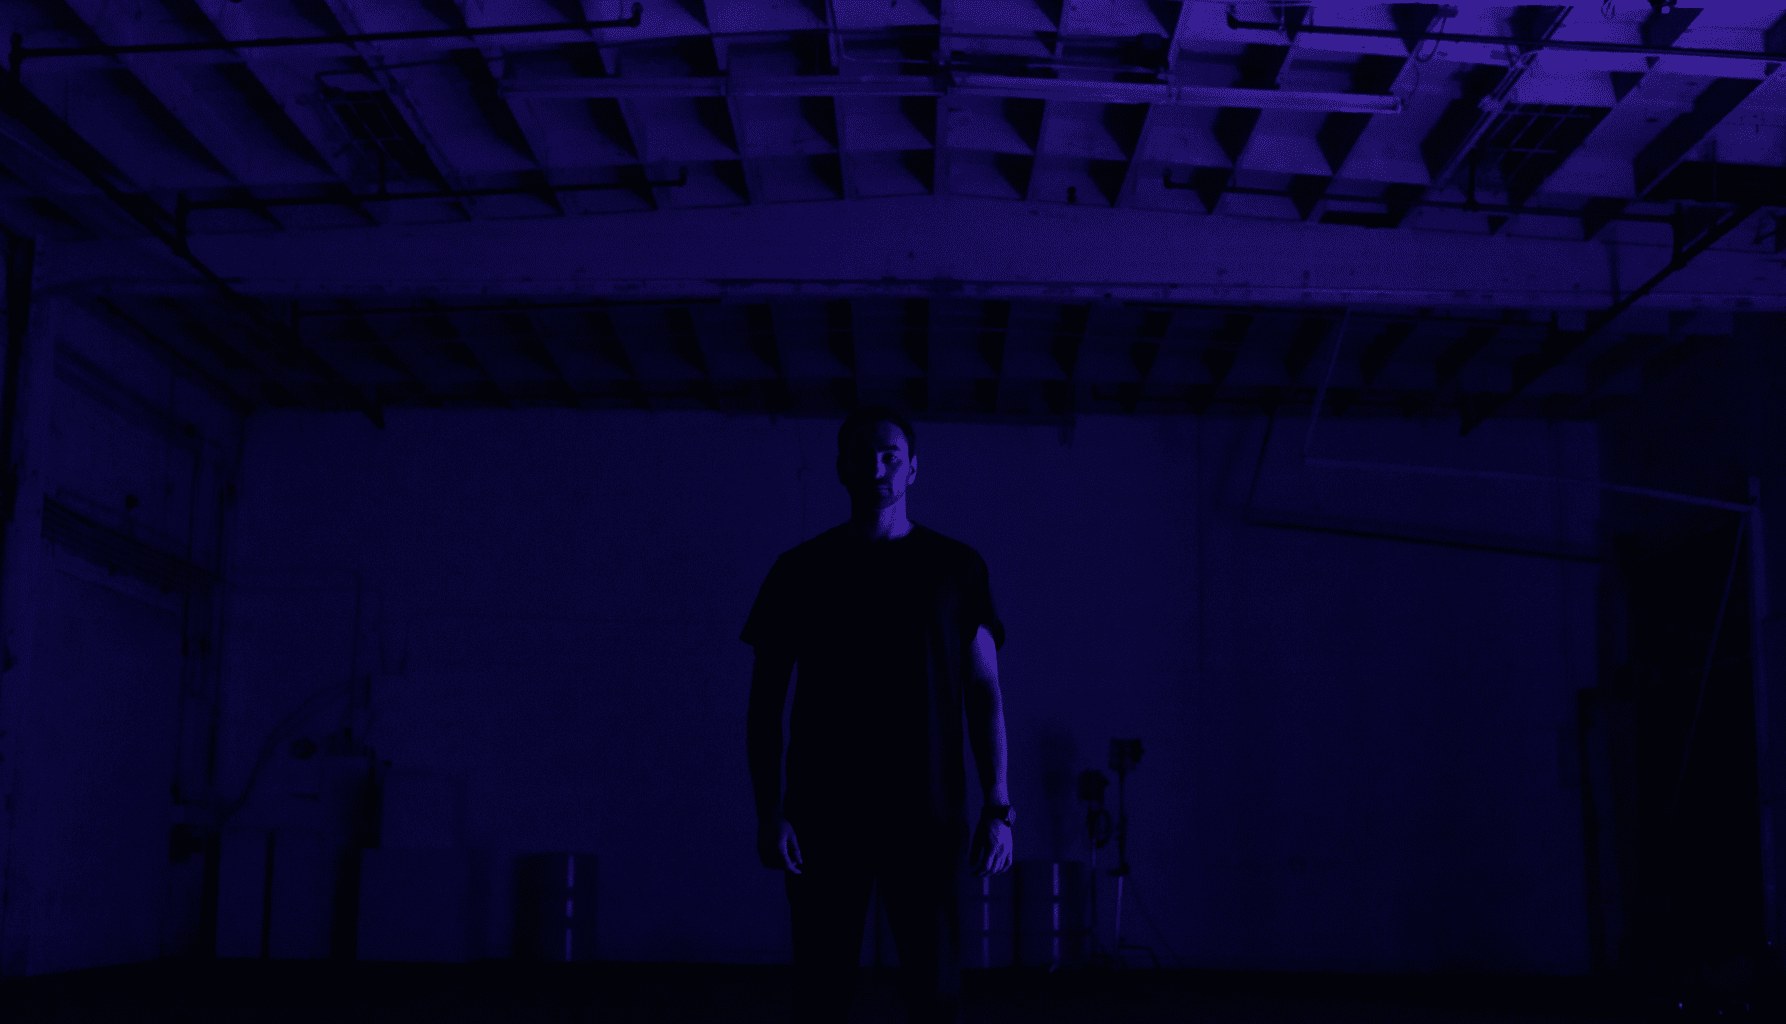 Rising Melodic Techno Artist Burko Showcases His Own Vocals on “Here Before”